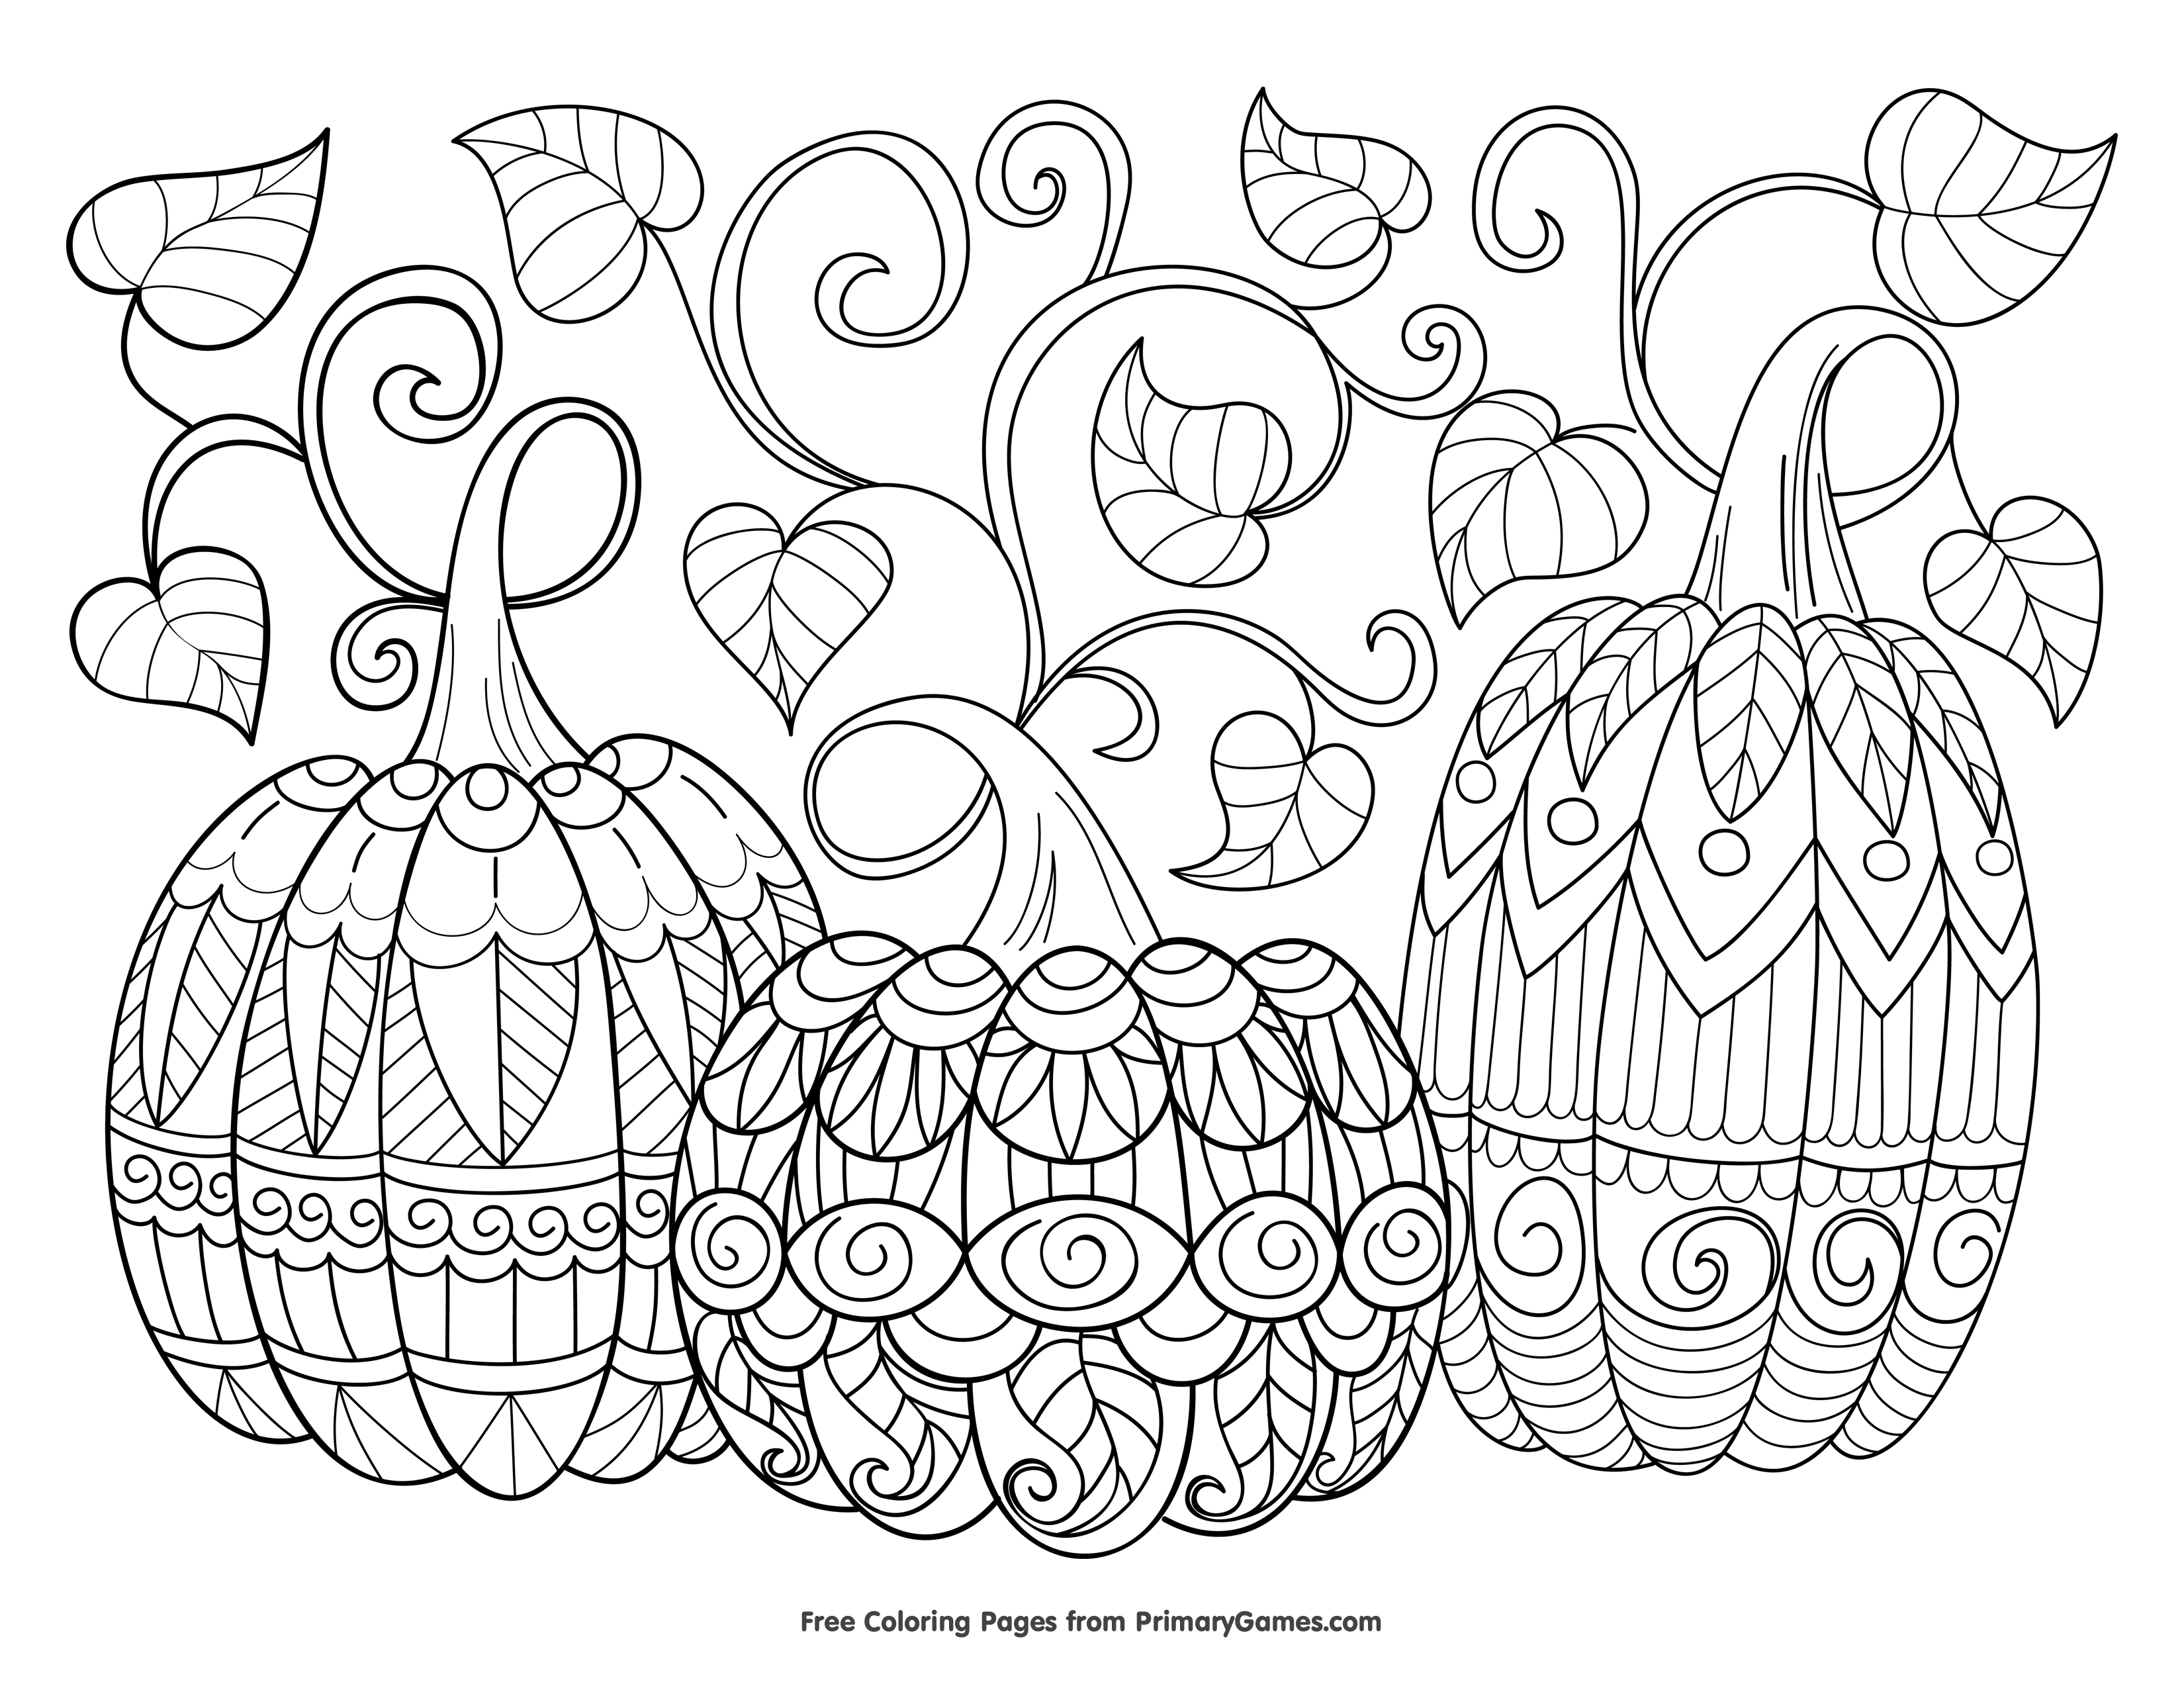 https://www.happinessishomemade.net/wp-content/uploads/2018/09/Three-Little-Pumpkins-Coloring-Page.jpg